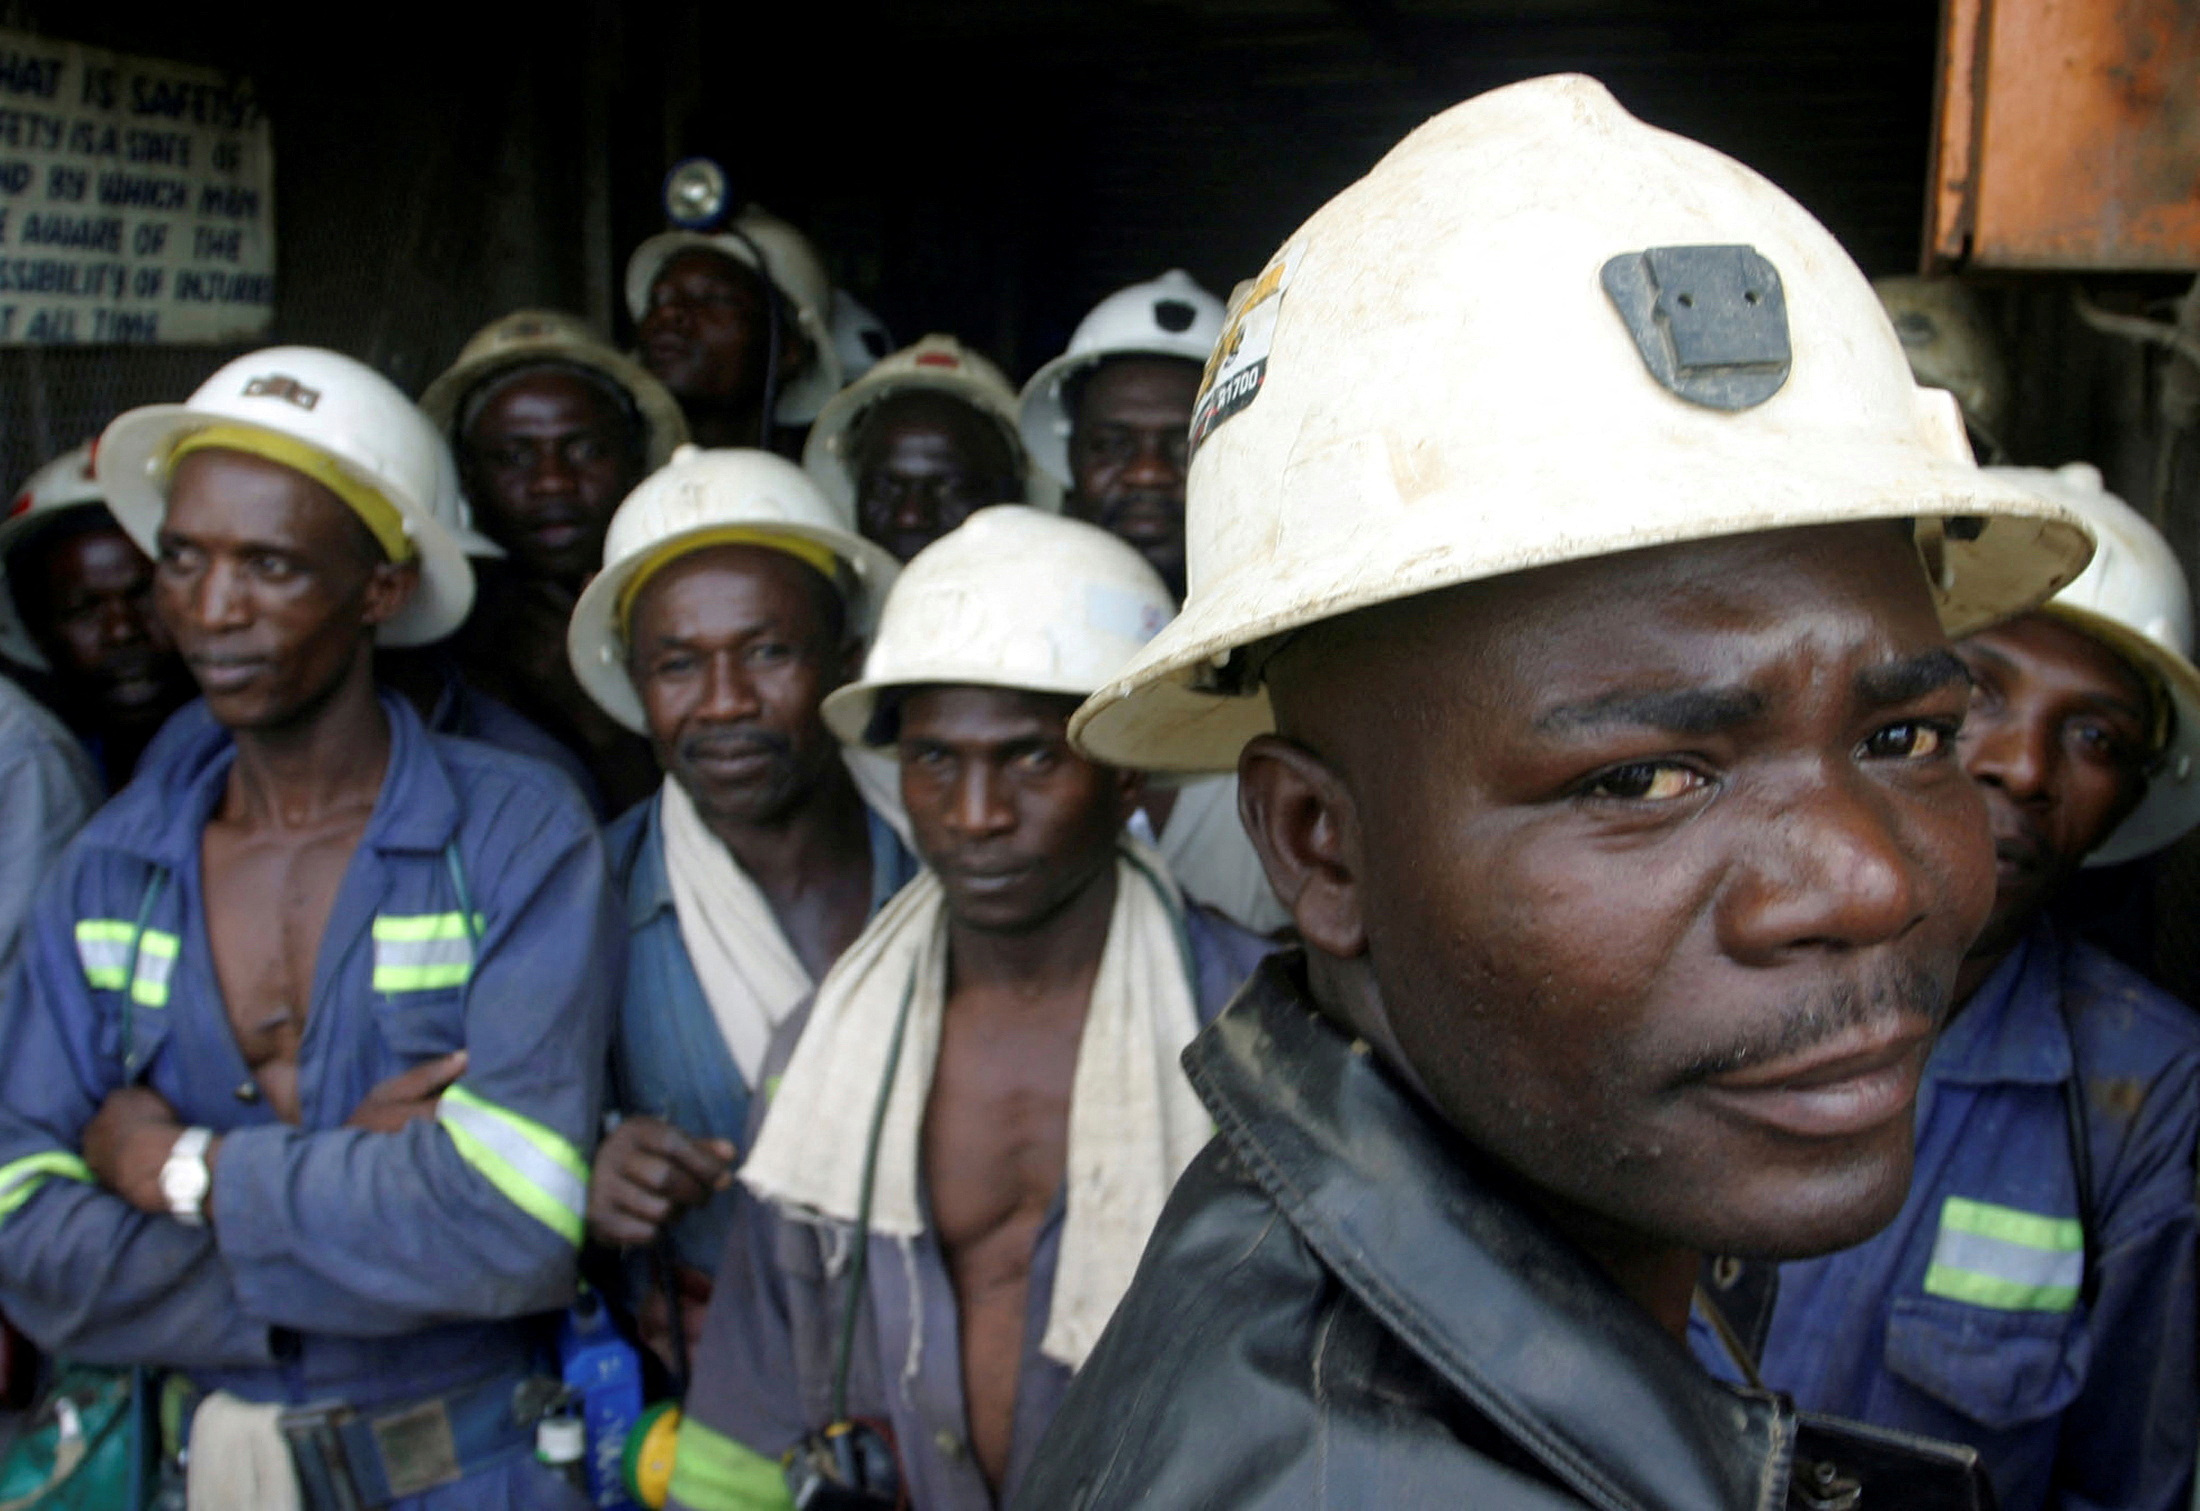 FILE PHOTO: Konkola Copper Mines PLC workers wait in a lift before going to work underground in Konkola, April 12, 2005. REUTERS/Stringer/File Photo